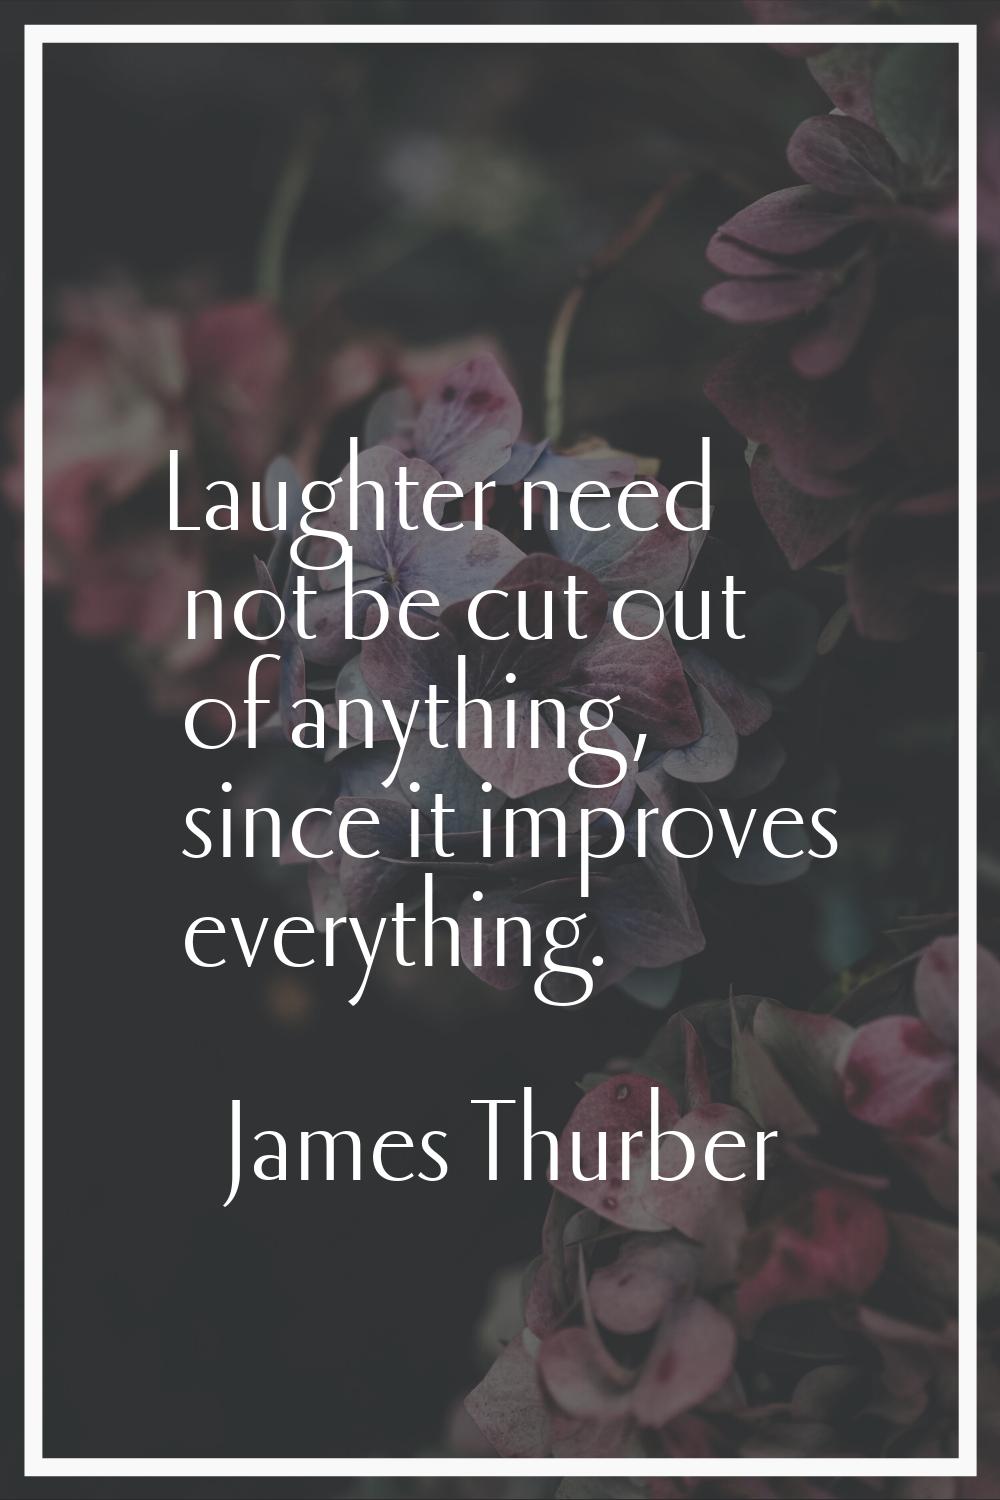 Laughter need not be cut out of anything, since it improves everything.